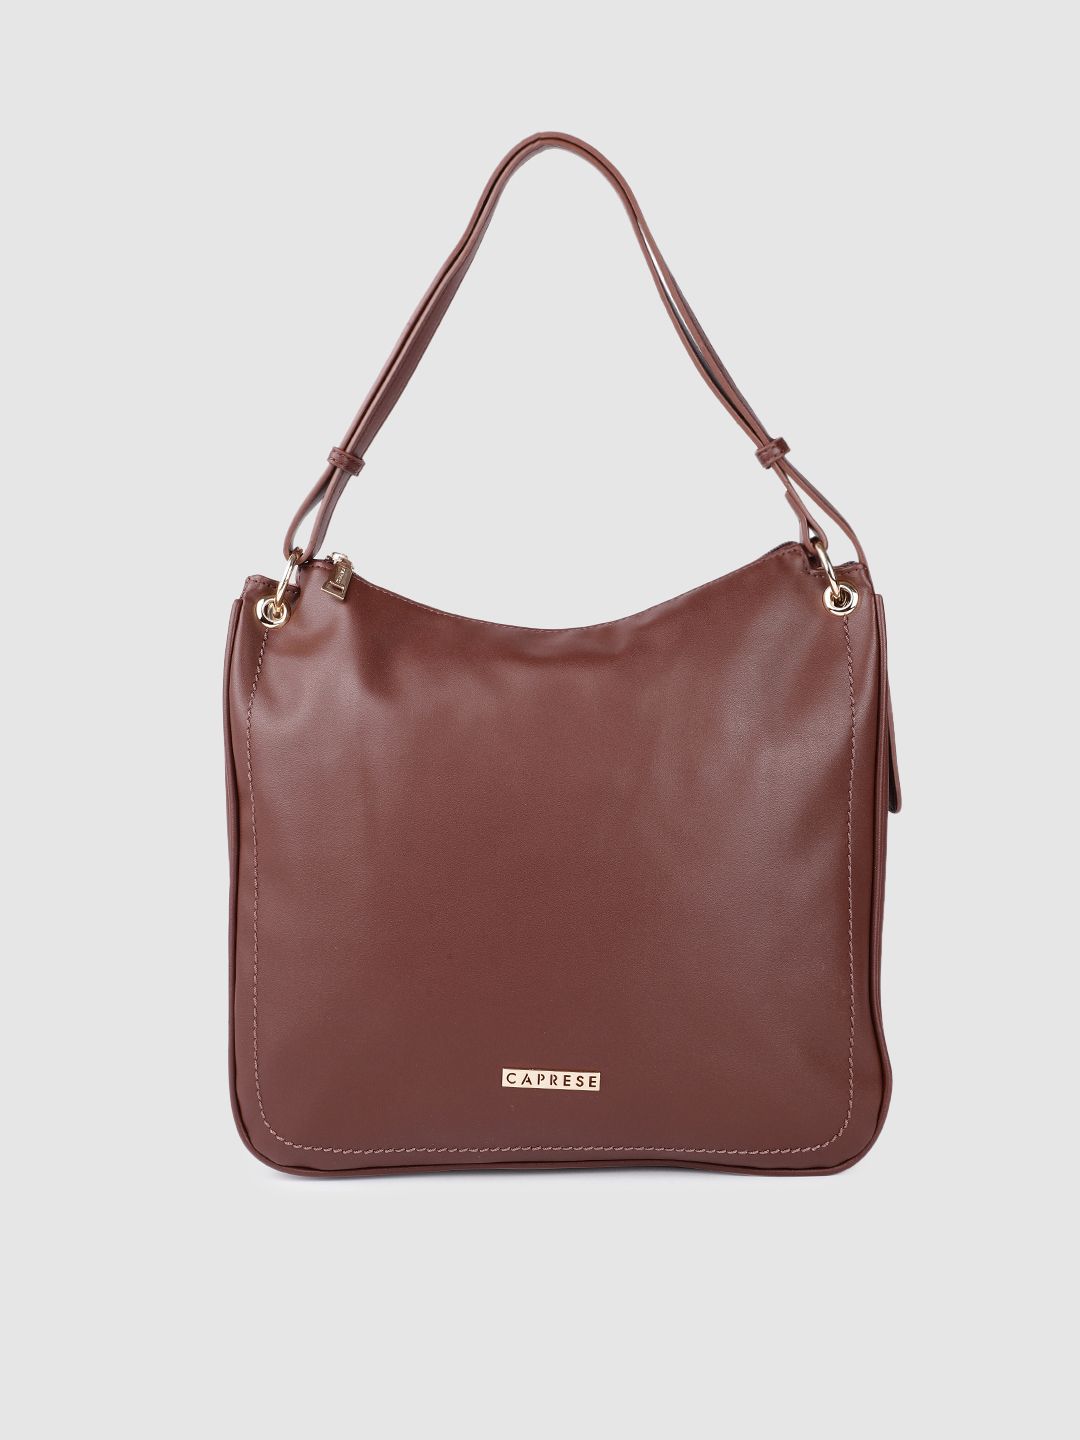 Caprese Brown PU Structured Hobo Bag Price in India